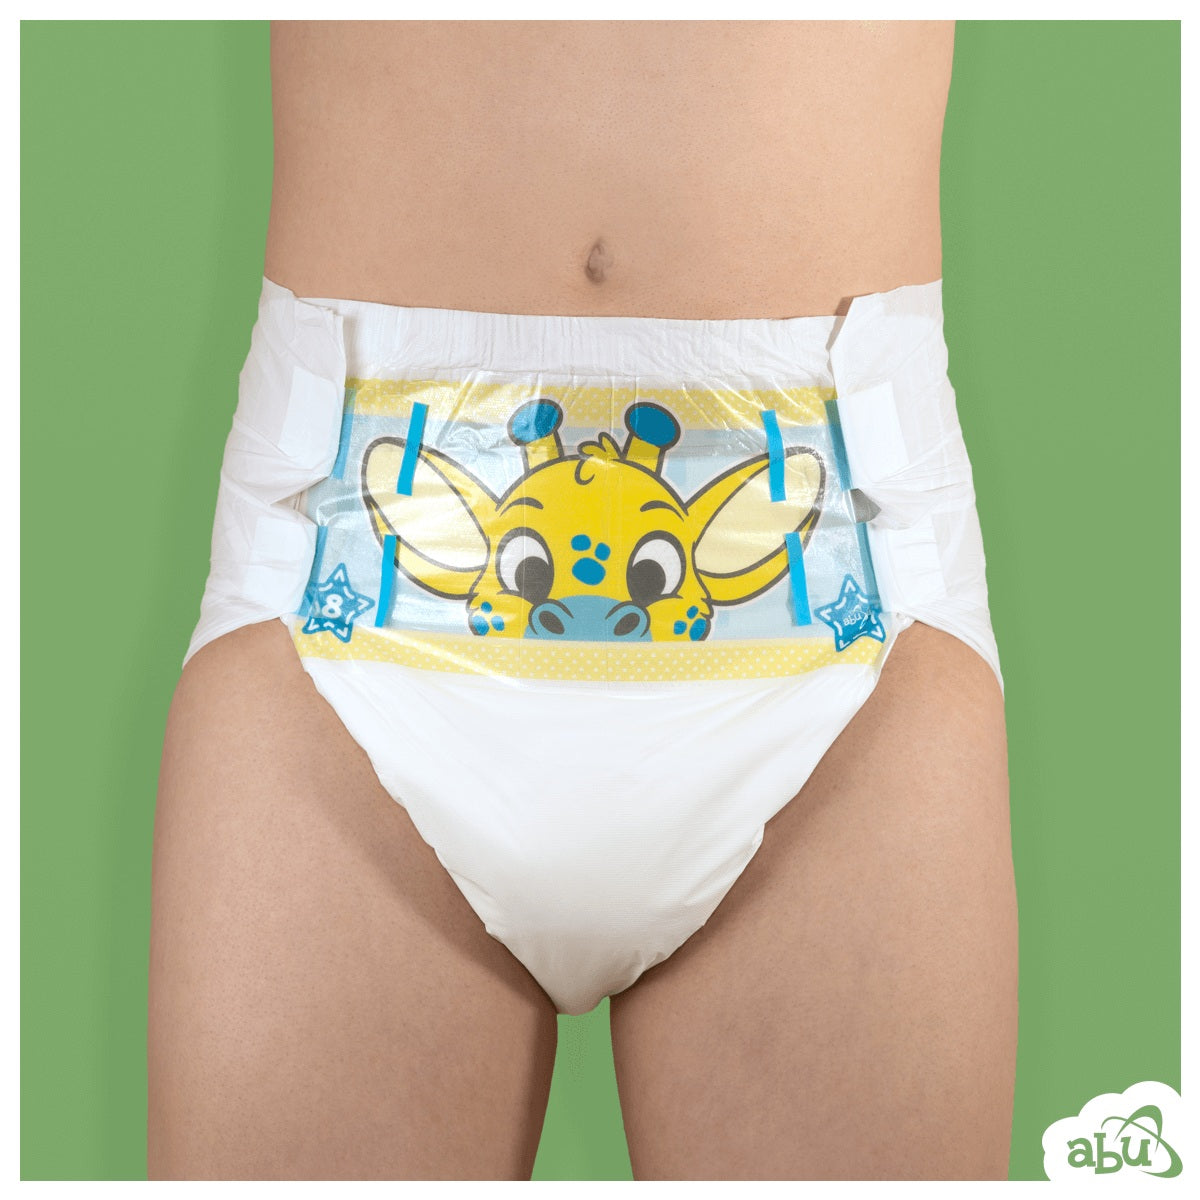 Front view of diaper on model with yellow giraffe character printed on front.